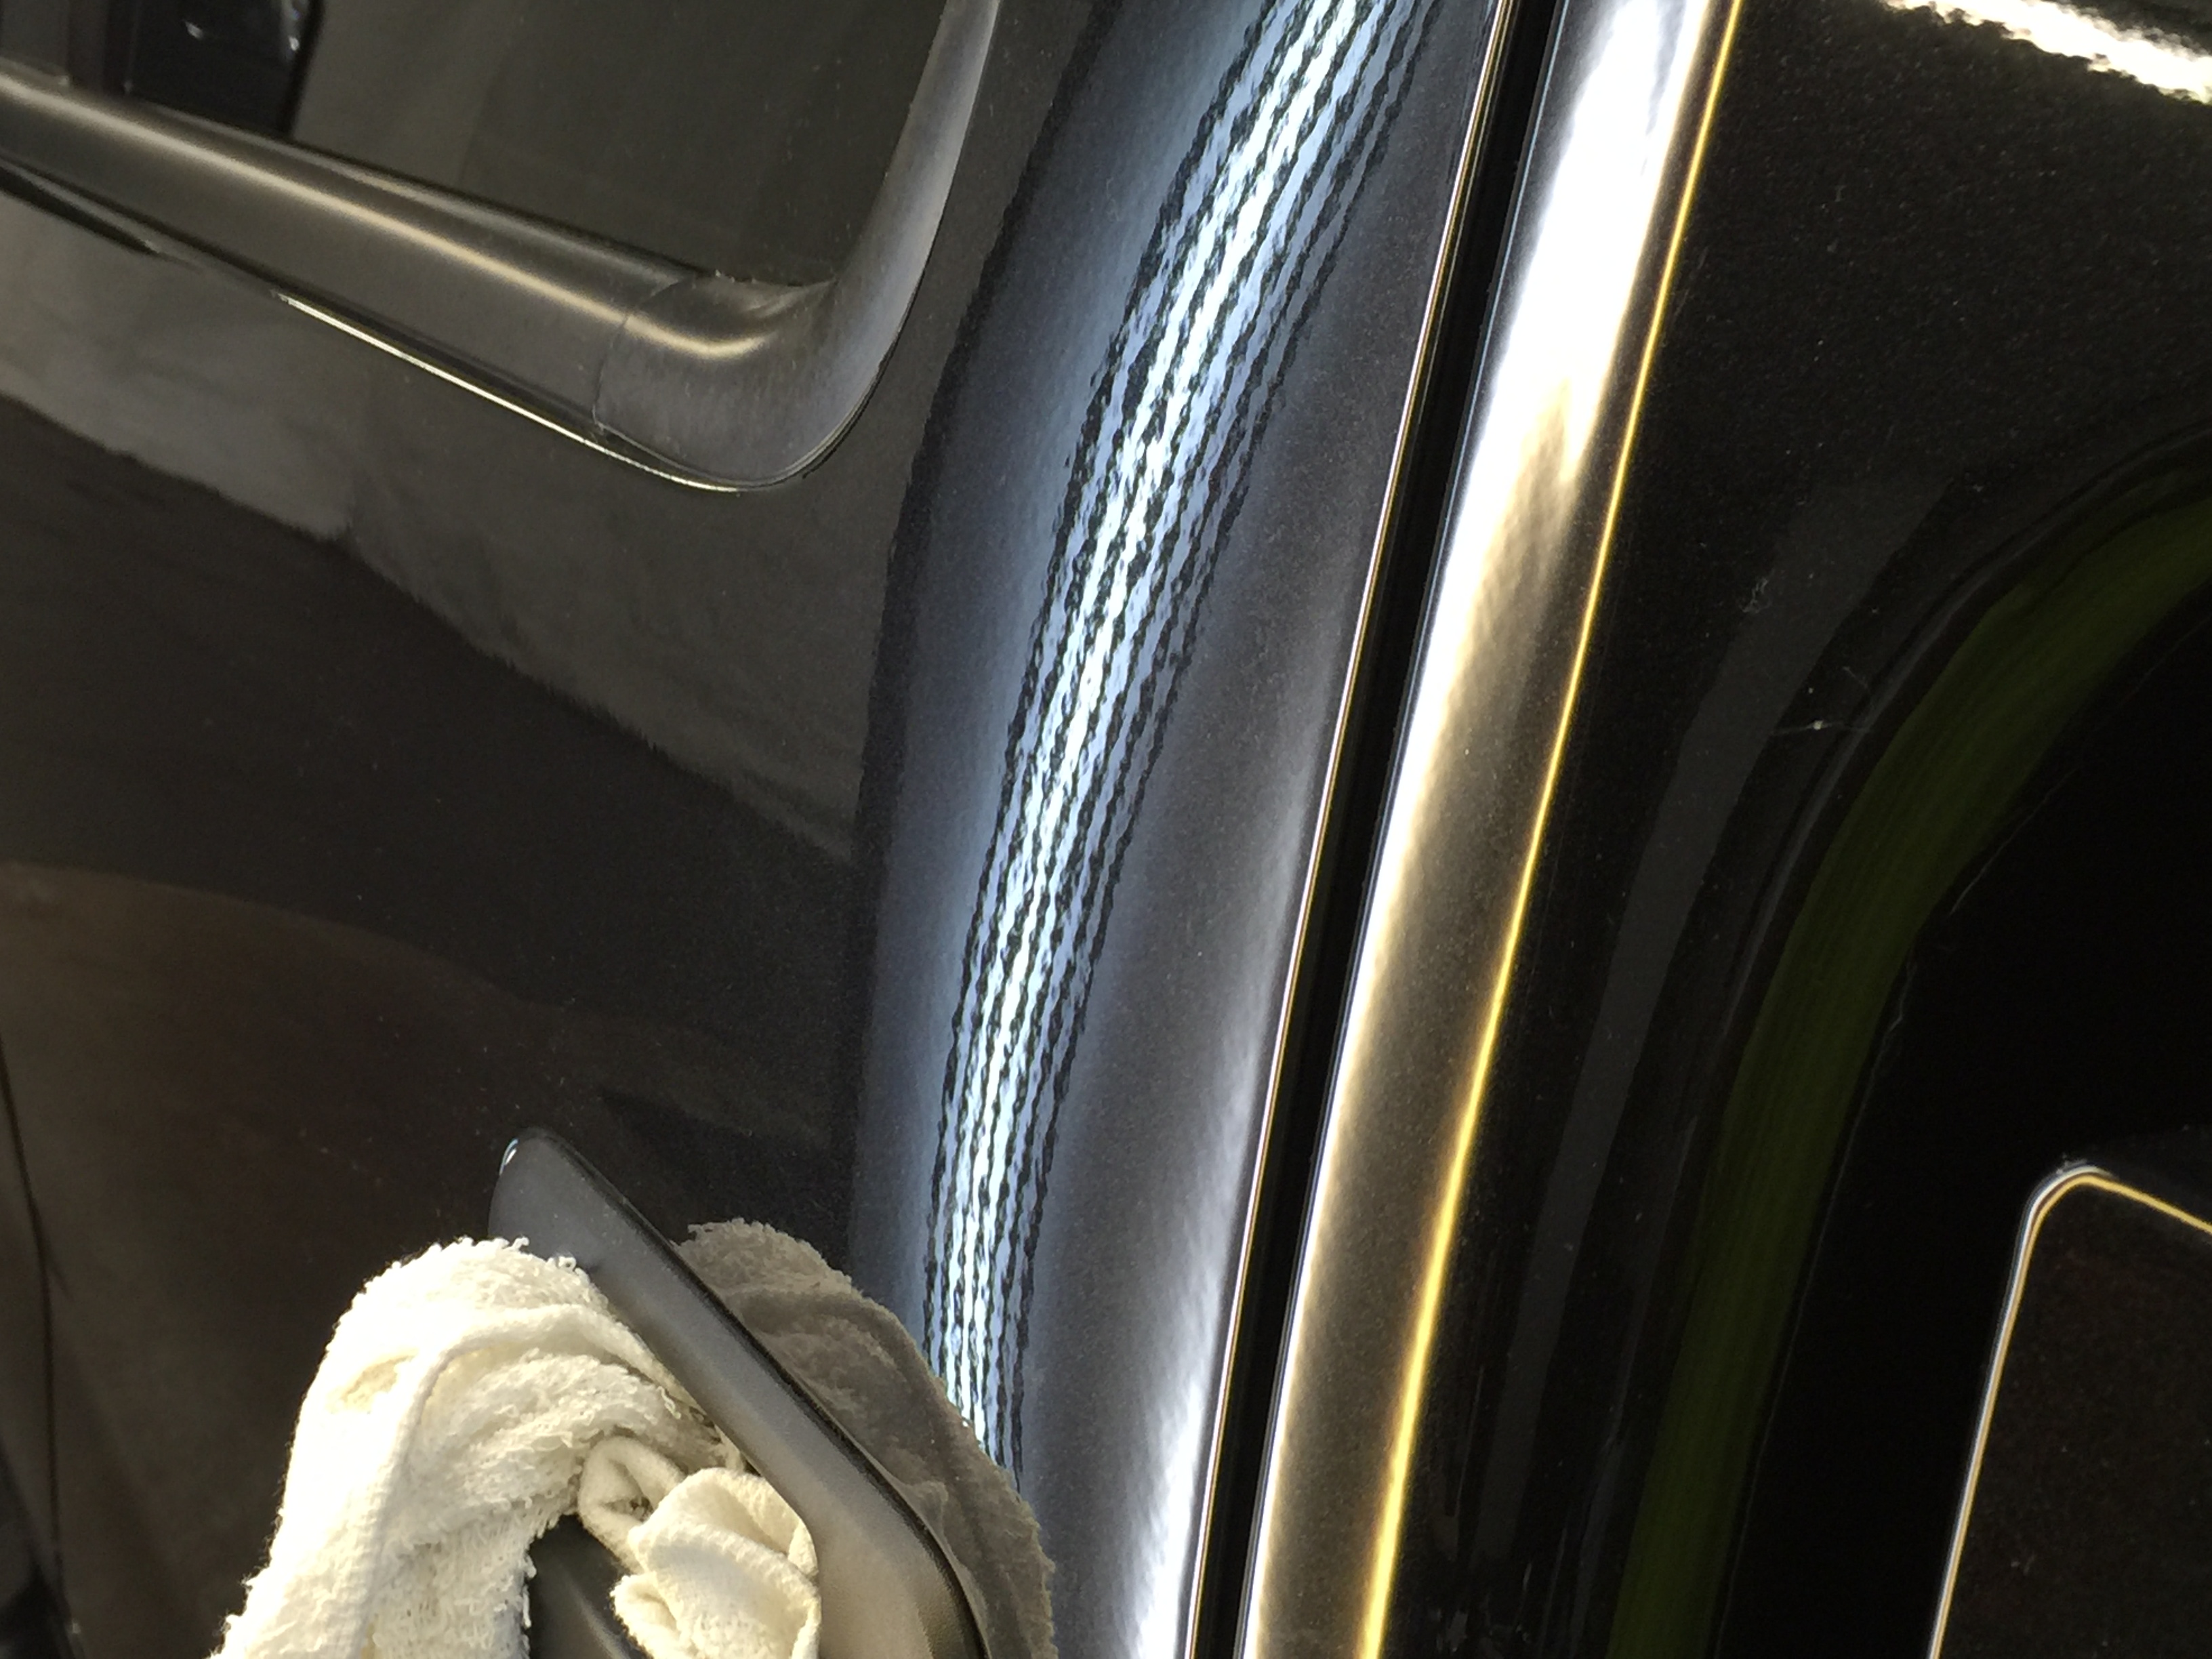 https://217dent.com 2014 Ford F-150 Dent Repair, Michael Bocek out of Springfield, IL. Drivers Side Rear Door, all glue pull dent removal. Paintless Dent Repair, Paintless Dent Removal, Taylorville, Decatur, Pana, IL